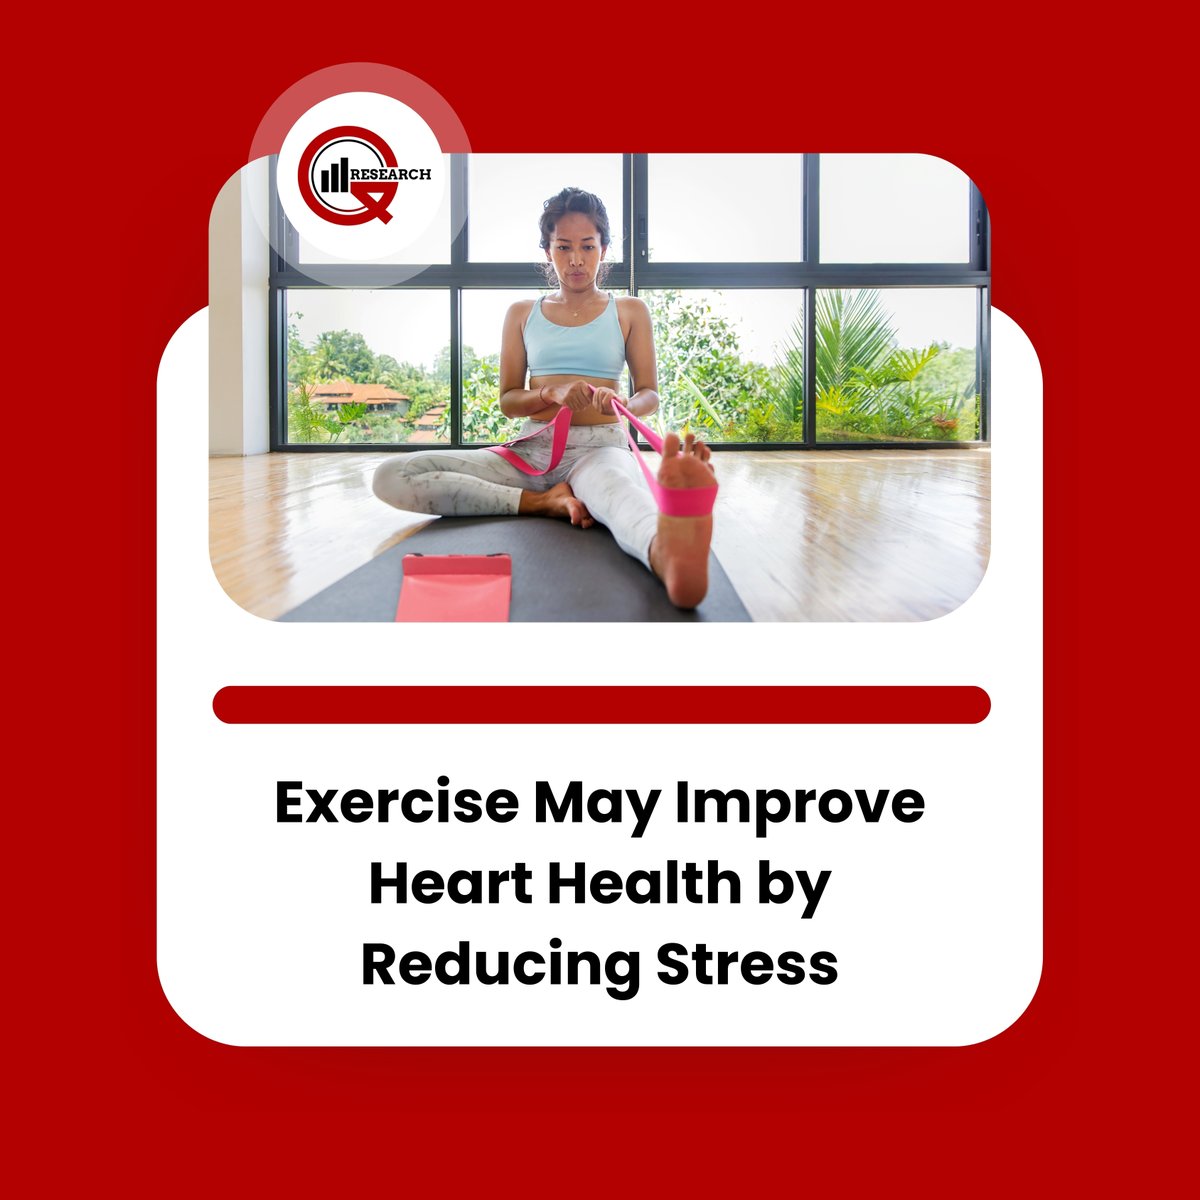 The 𝐛𝐞𝐧𝐞𝐟𝐢𝐭𝐬 𝐨𝐟 𝐩𝐡𝐲𝐬𝐢𝐜𝐚𝐥 𝐚𝐜𝐭𝐢𝐯𝐢𝐭𝐲 in preventing heart attack and stroke may be even greater for people with depression.

#hearthealthboost #depressionawareness #strokeprevention #mentalhealthmatters #healthyheartmind